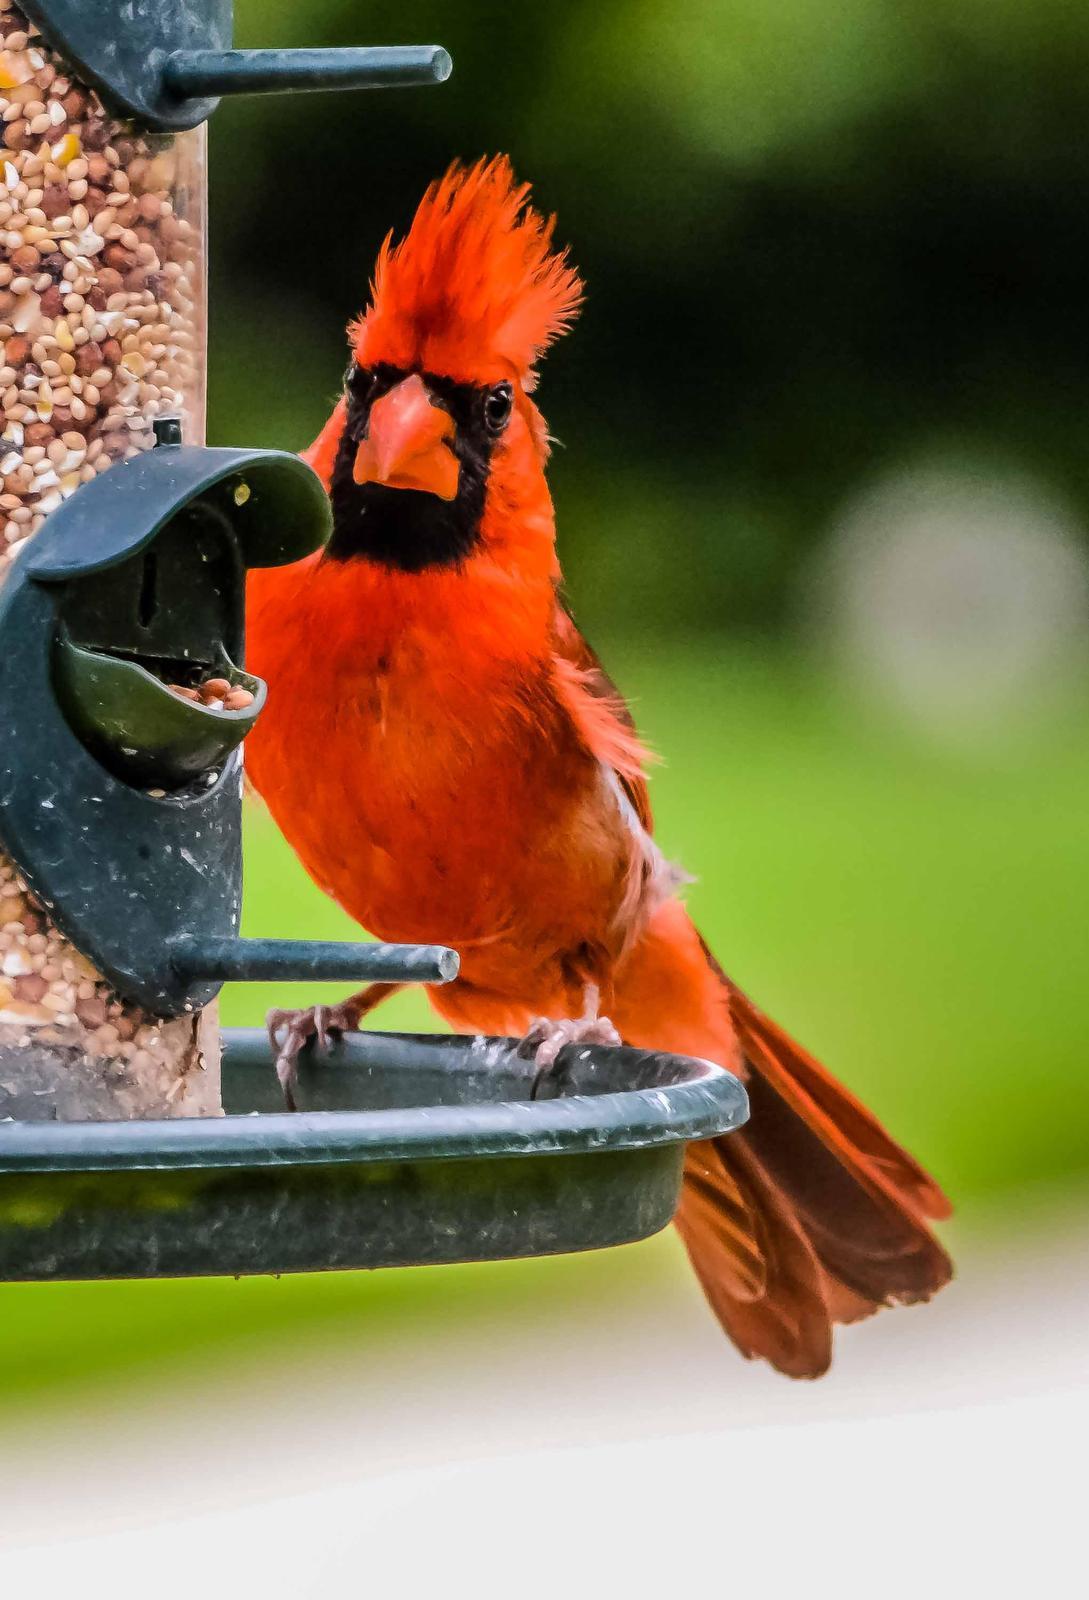 Northern Cardinal Photo by Wally Wenzel